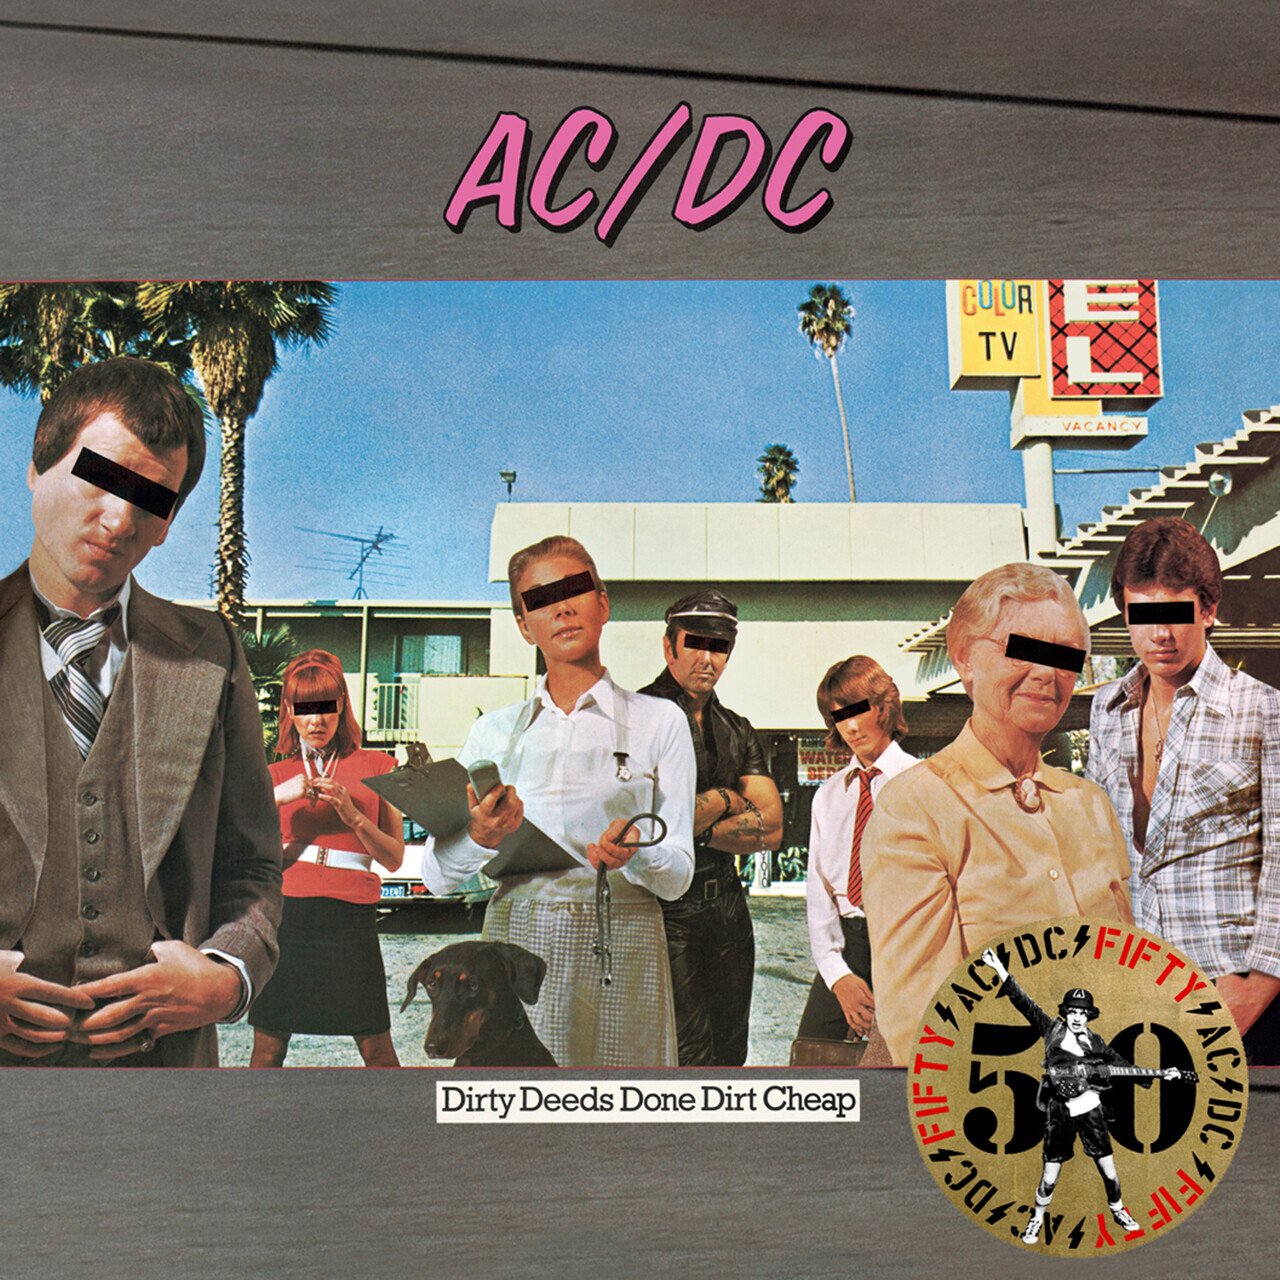 Рок Sony Music AC/DC - Dirty Deeds Done Dirt Cheap (Limited 50th Anniversary Edition, 180 Gram Gold Nugget Vinyl LP) рок sony music ac dc dirty deeds done dirt cheap limited 50th anniversary edition 180 gram gold nugget vinyl lp